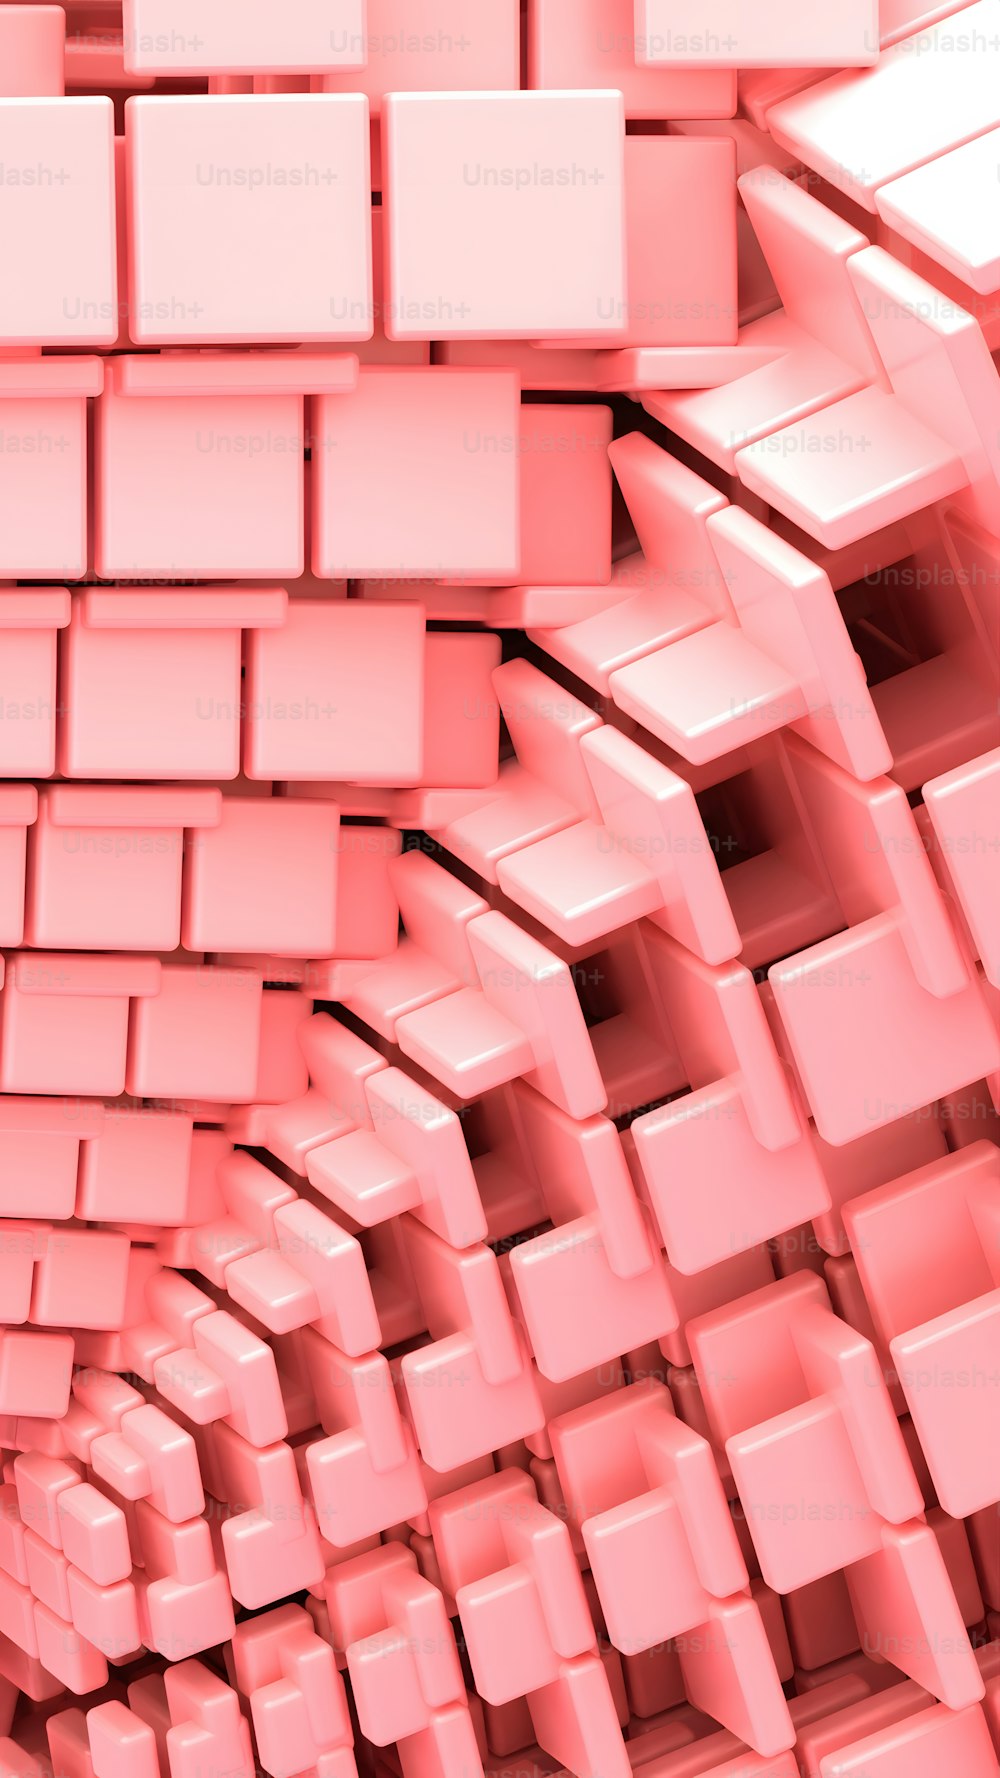 a large group of cubes that are pink and white